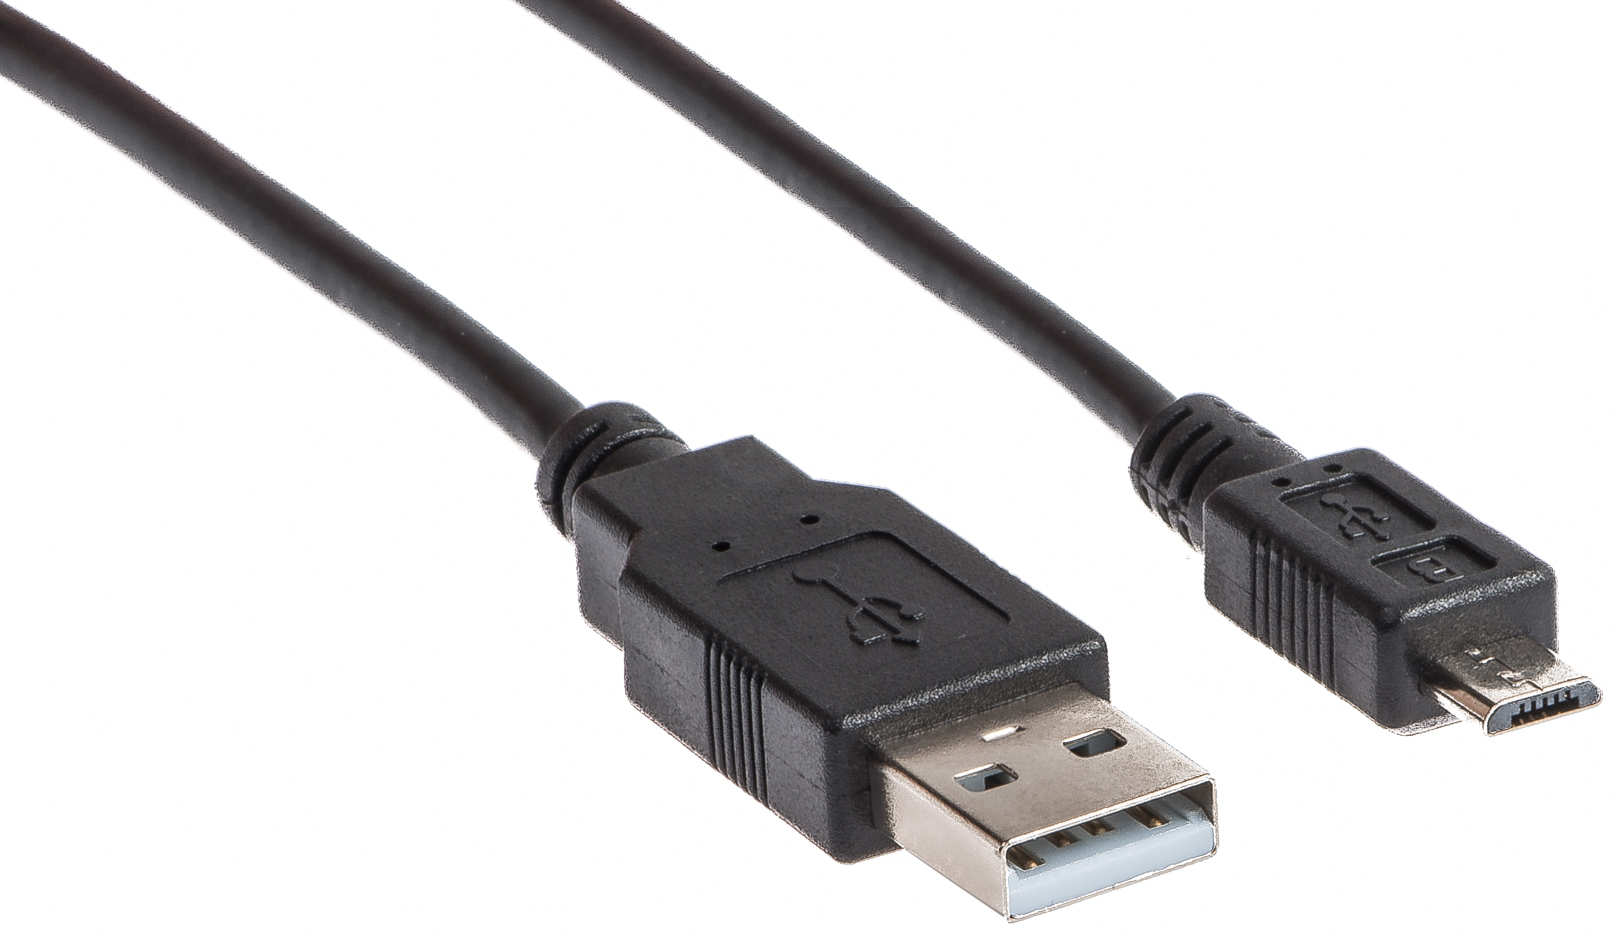 LINK2GO USB 2.0 Cable, A - Micro-B US2313KBB male/male, 2.0m